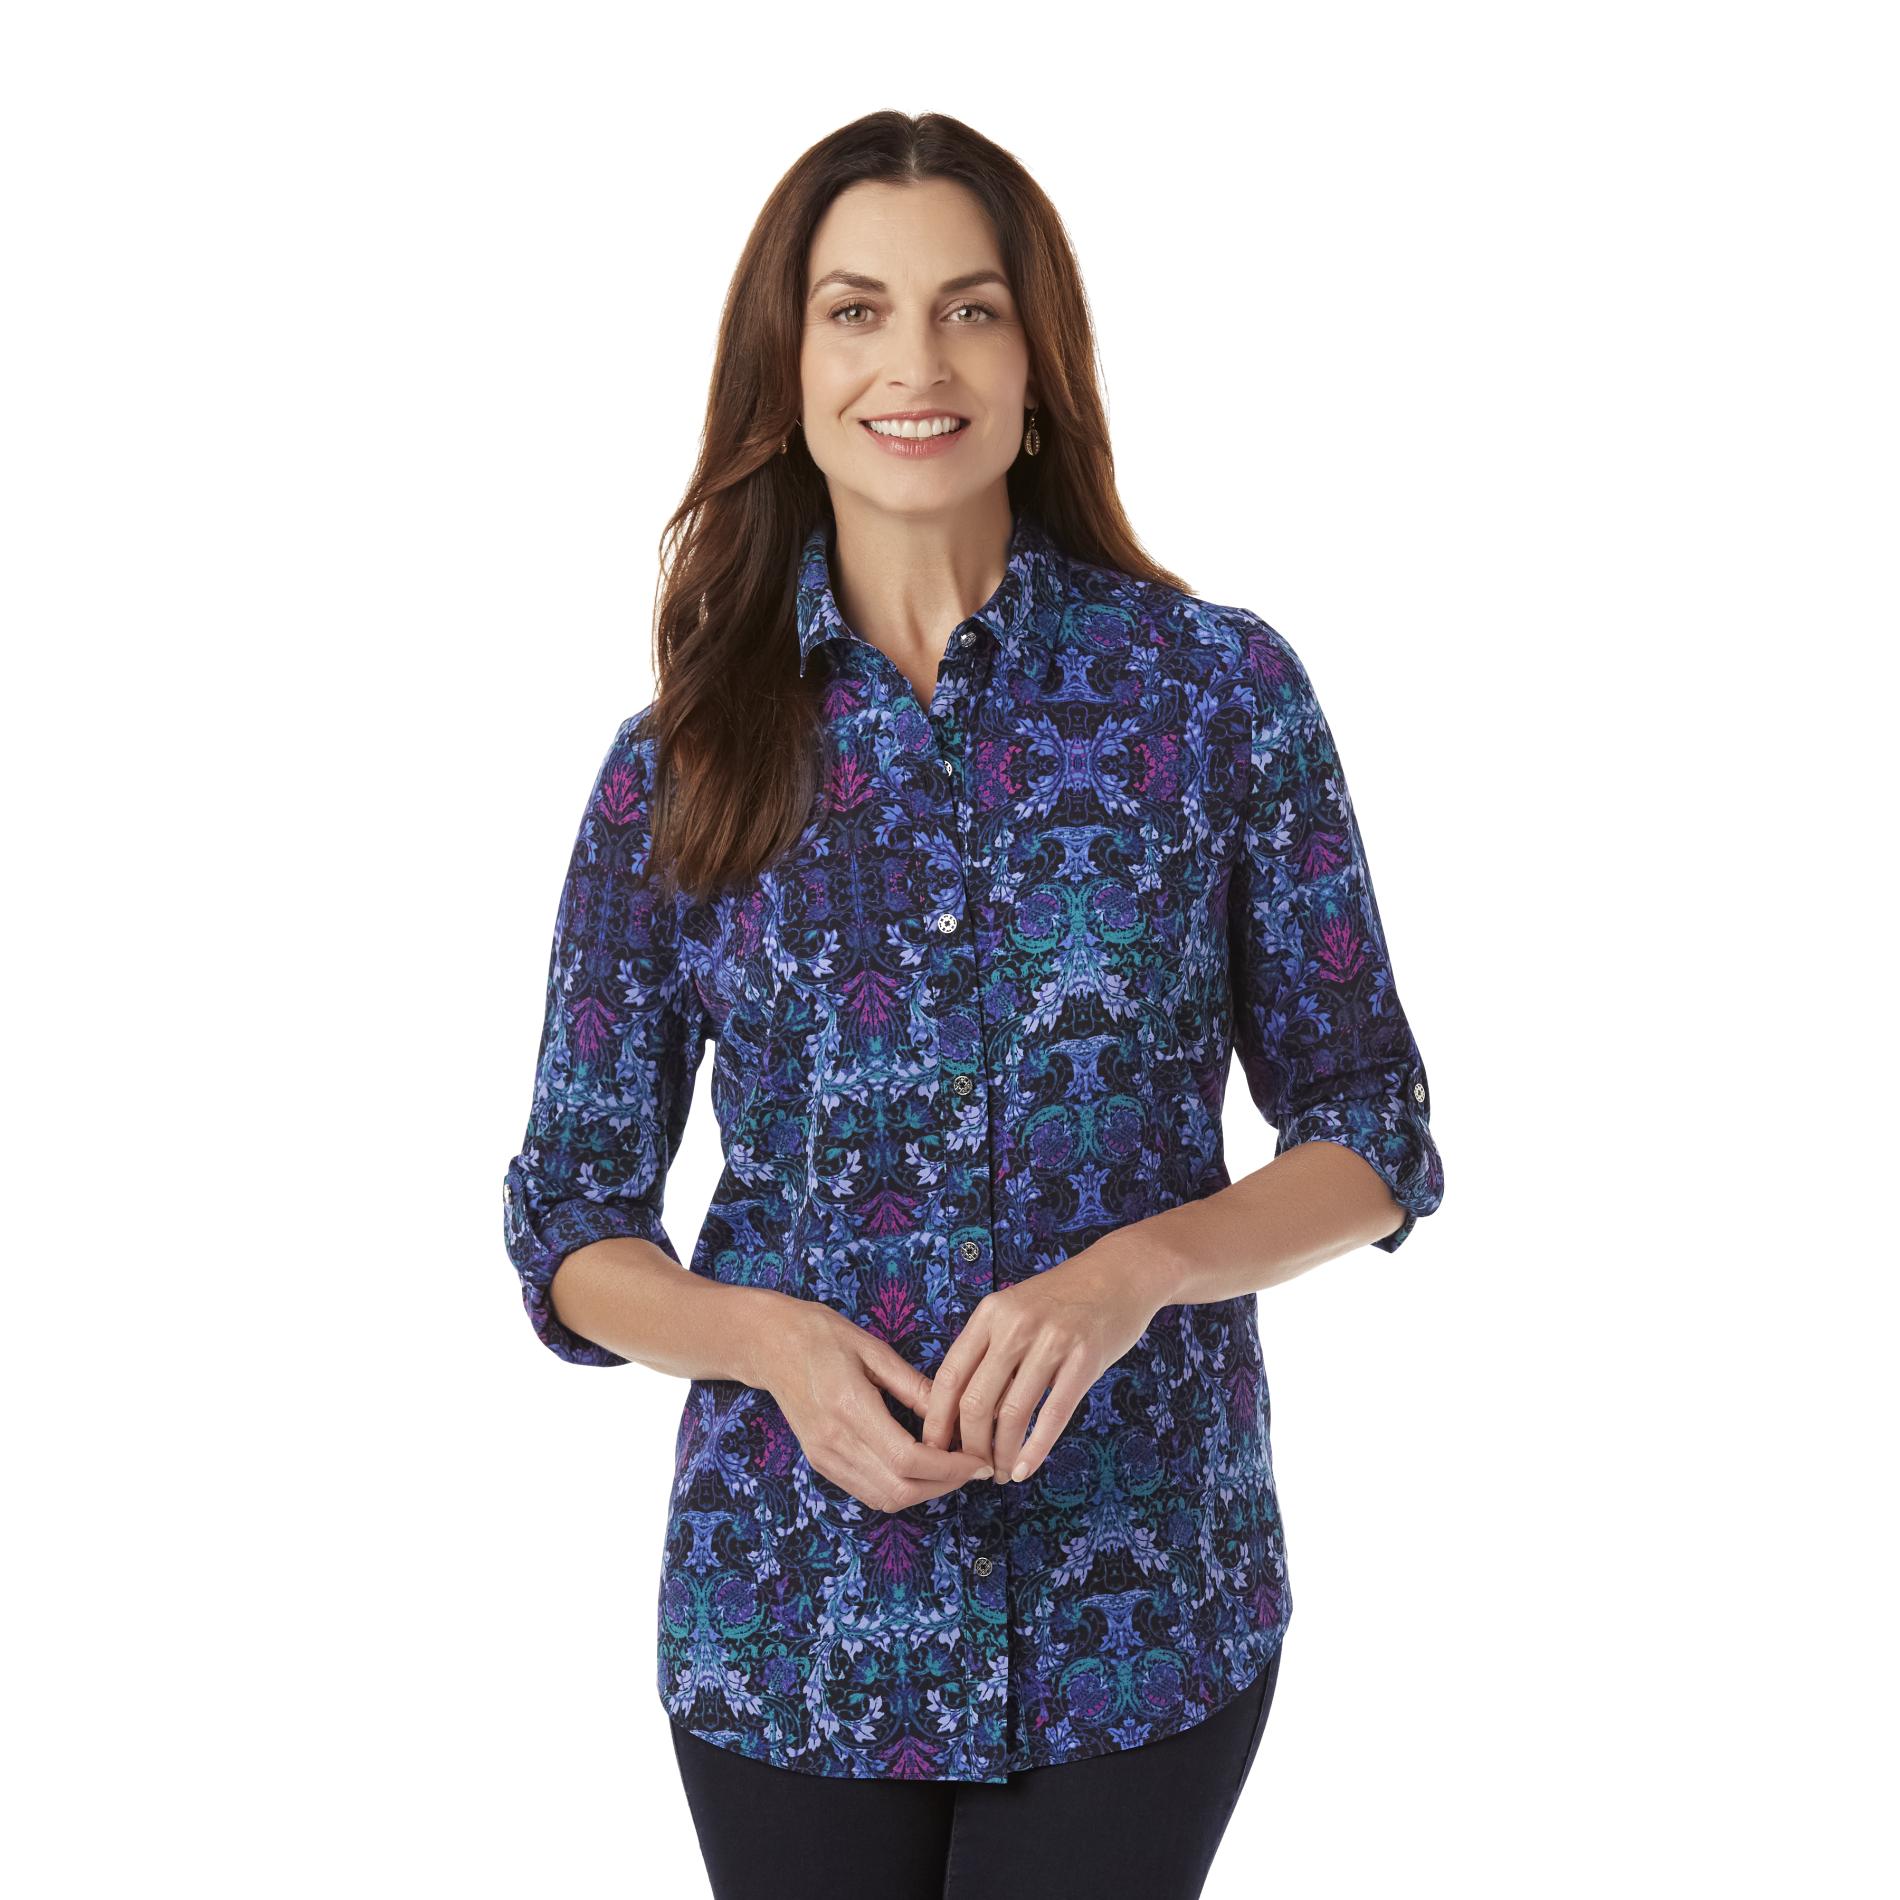 Jaclyn Smith Women's Utility Blouse - Floral